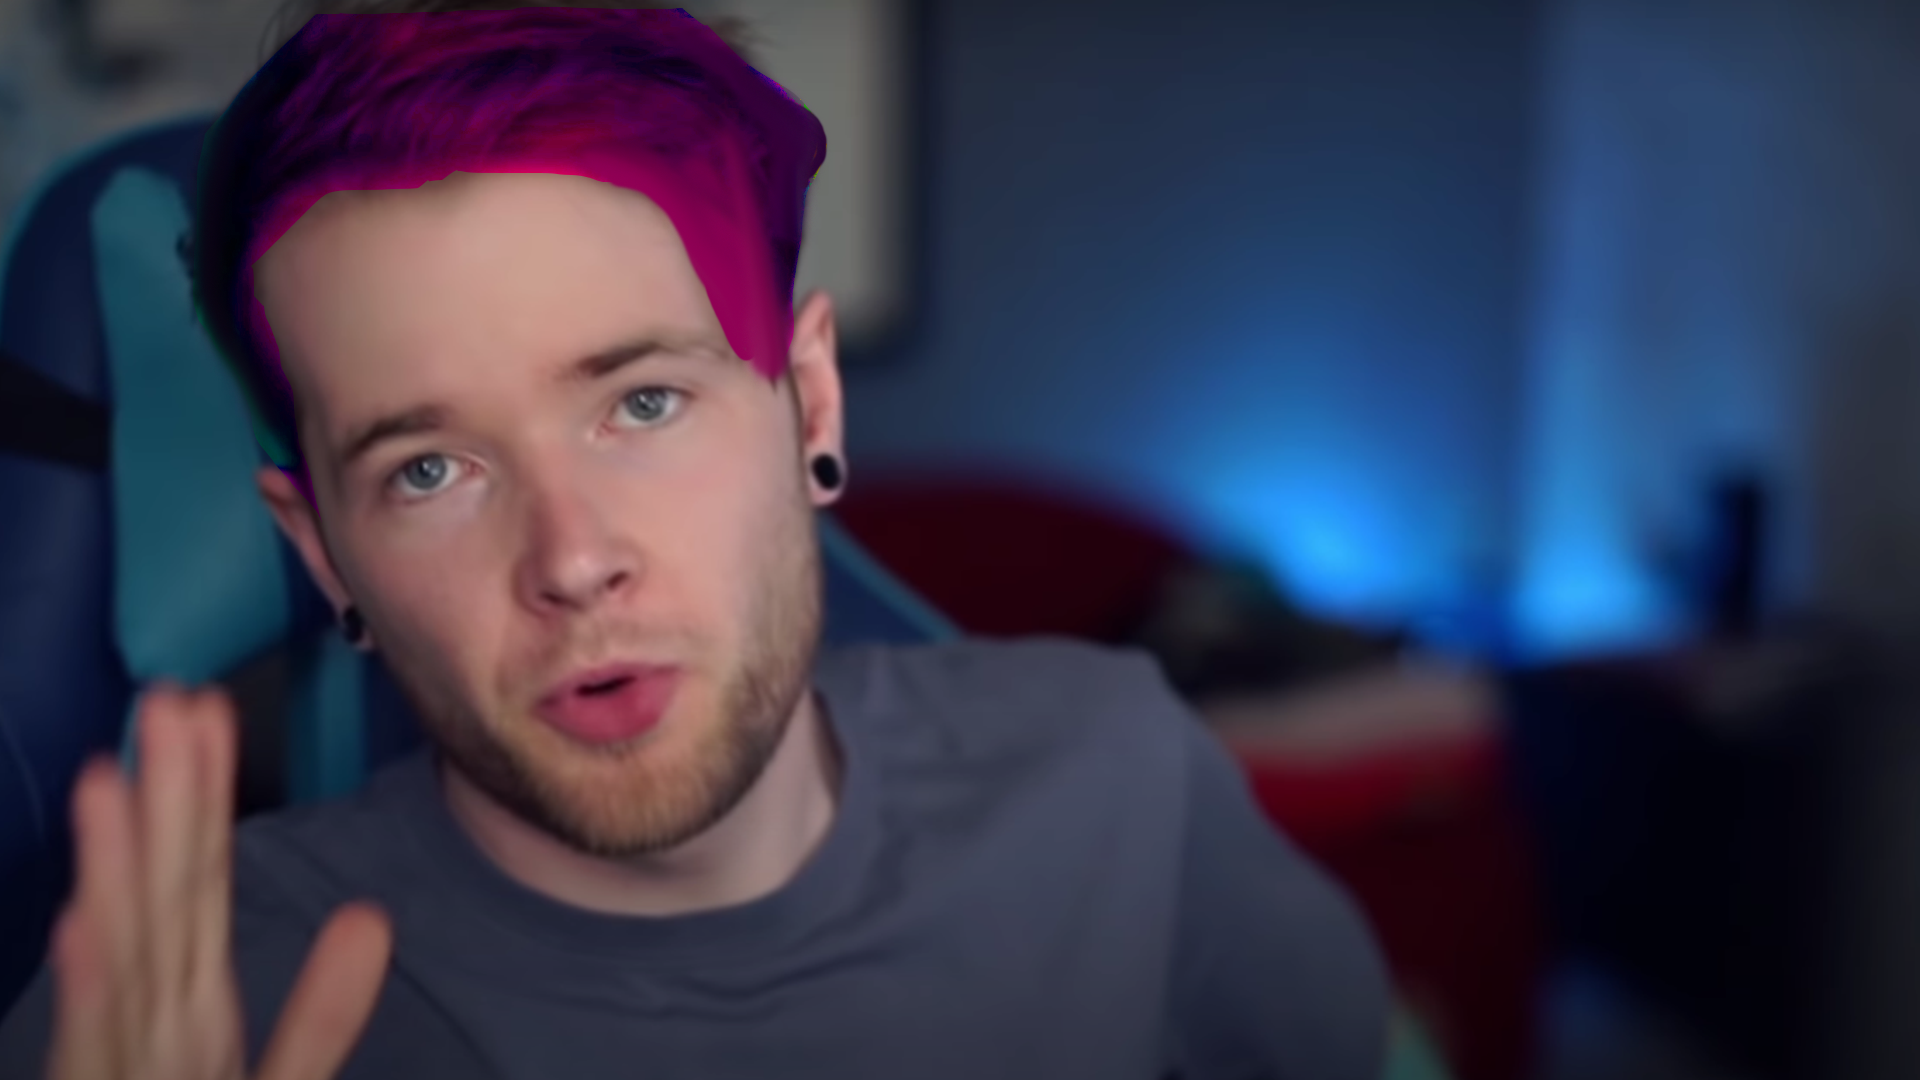 Dantdm's New Hair: The Pink and Blue Haircut! - wide 2